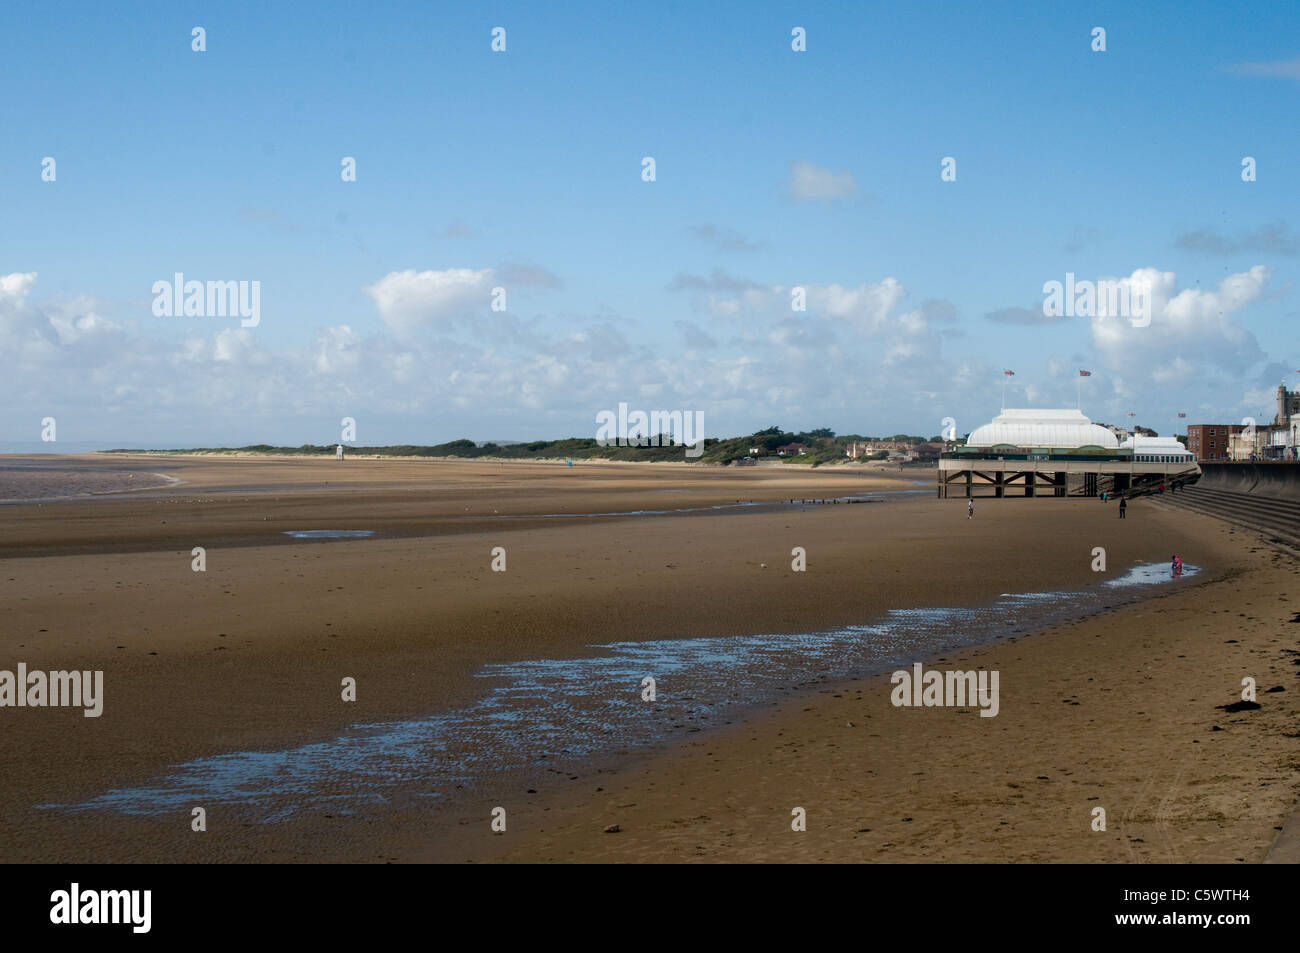 The wide sandy beach at Burnham-on-Sea, Somerset. it is a sunny windy day and the beach is almost deserted. Stock Photo